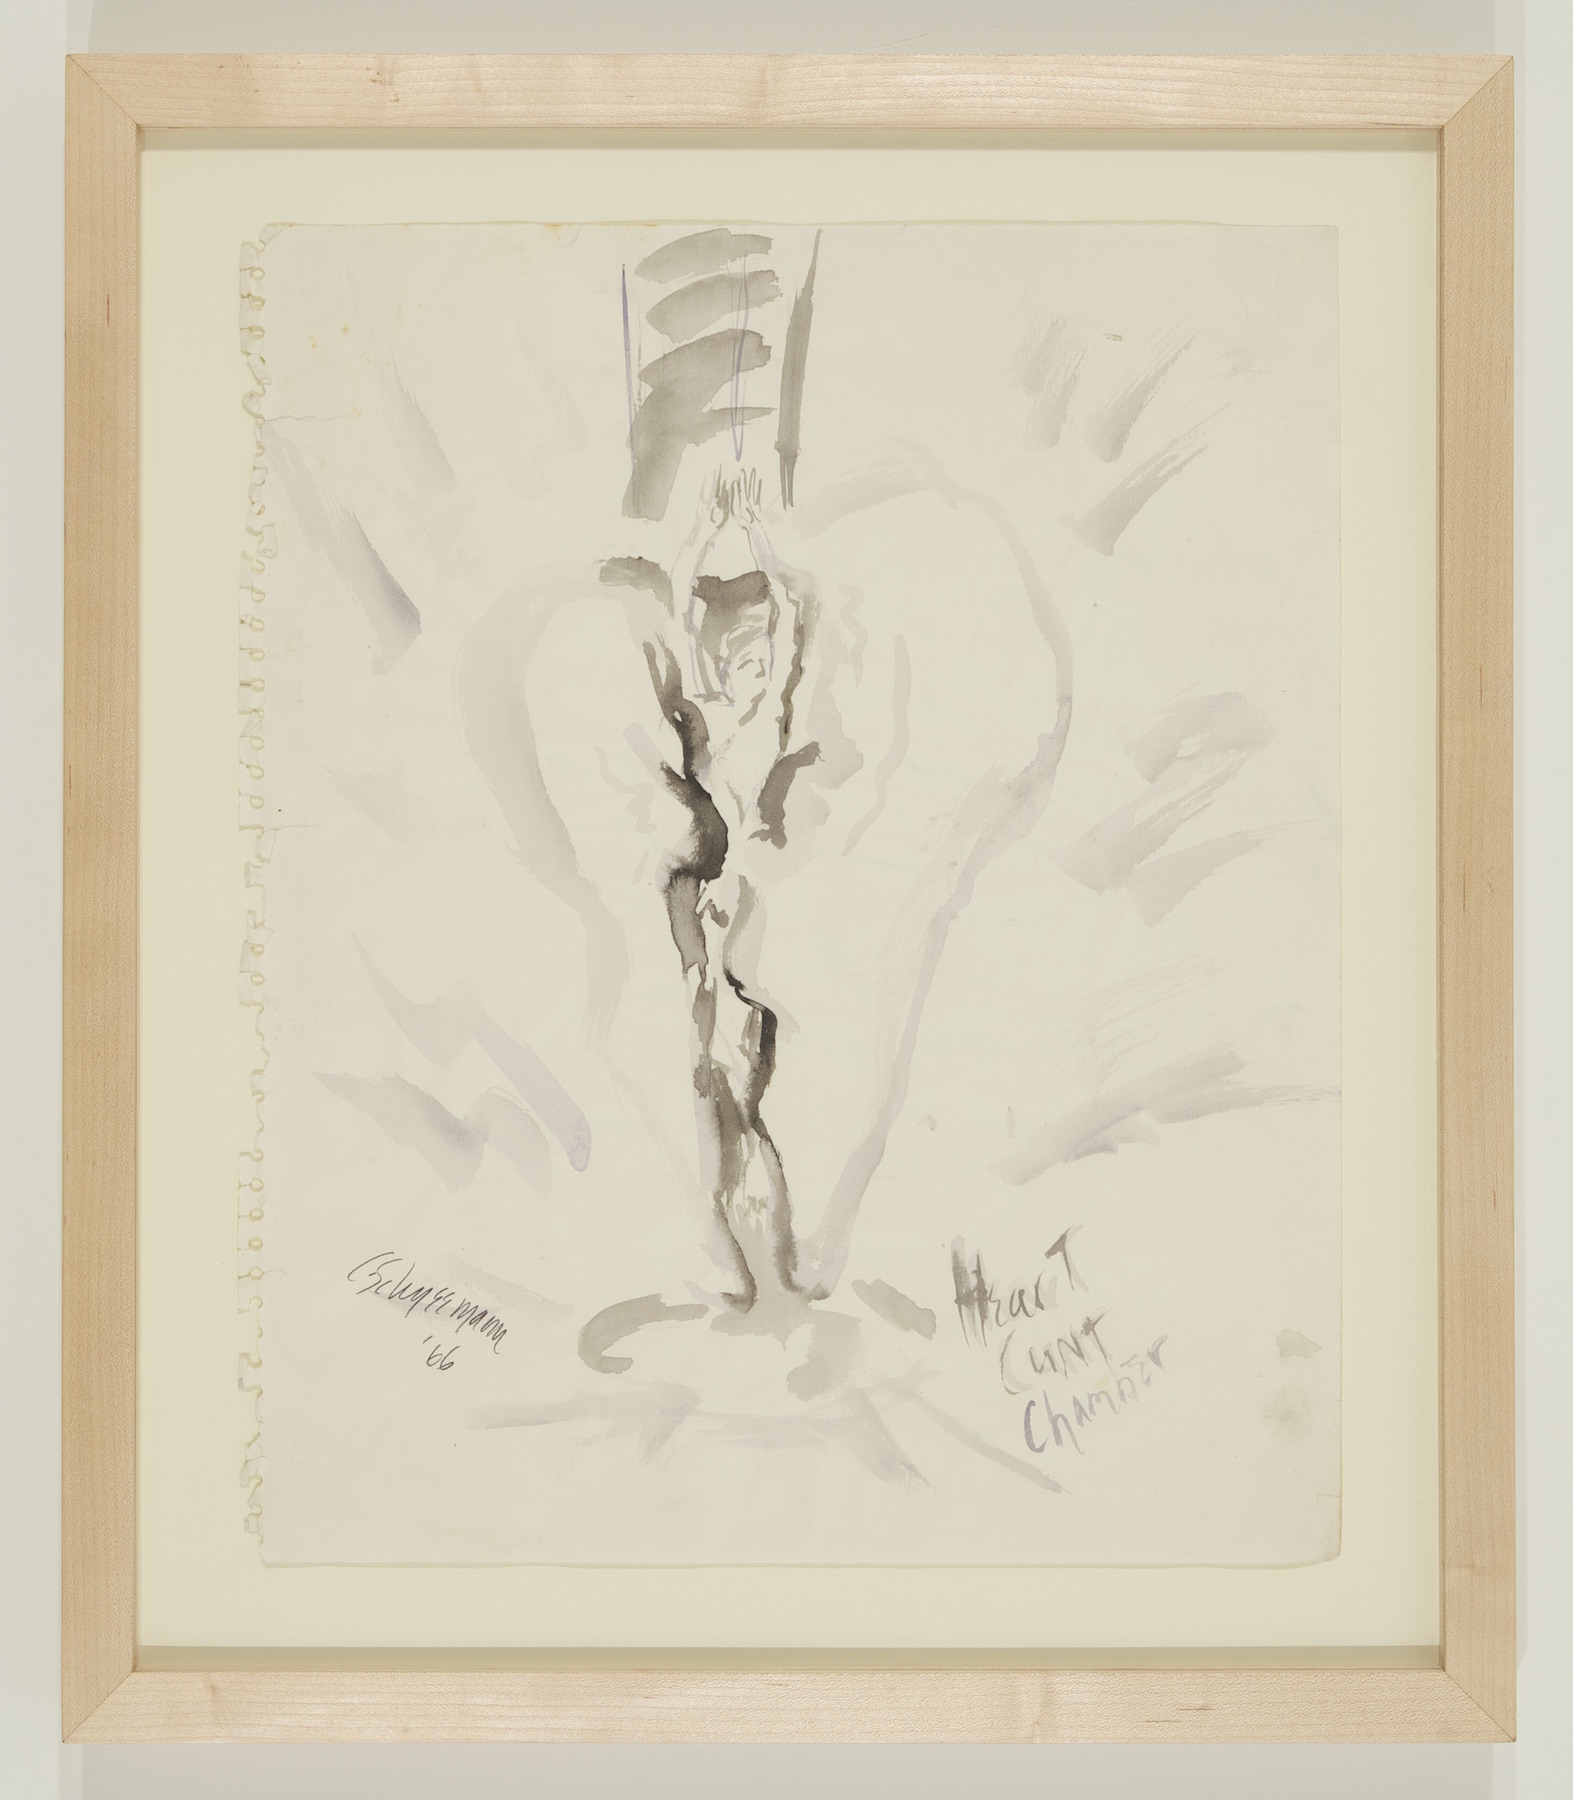 grey watercolor illustration of a female-like figure erupting from the center of a heart/vulva shape